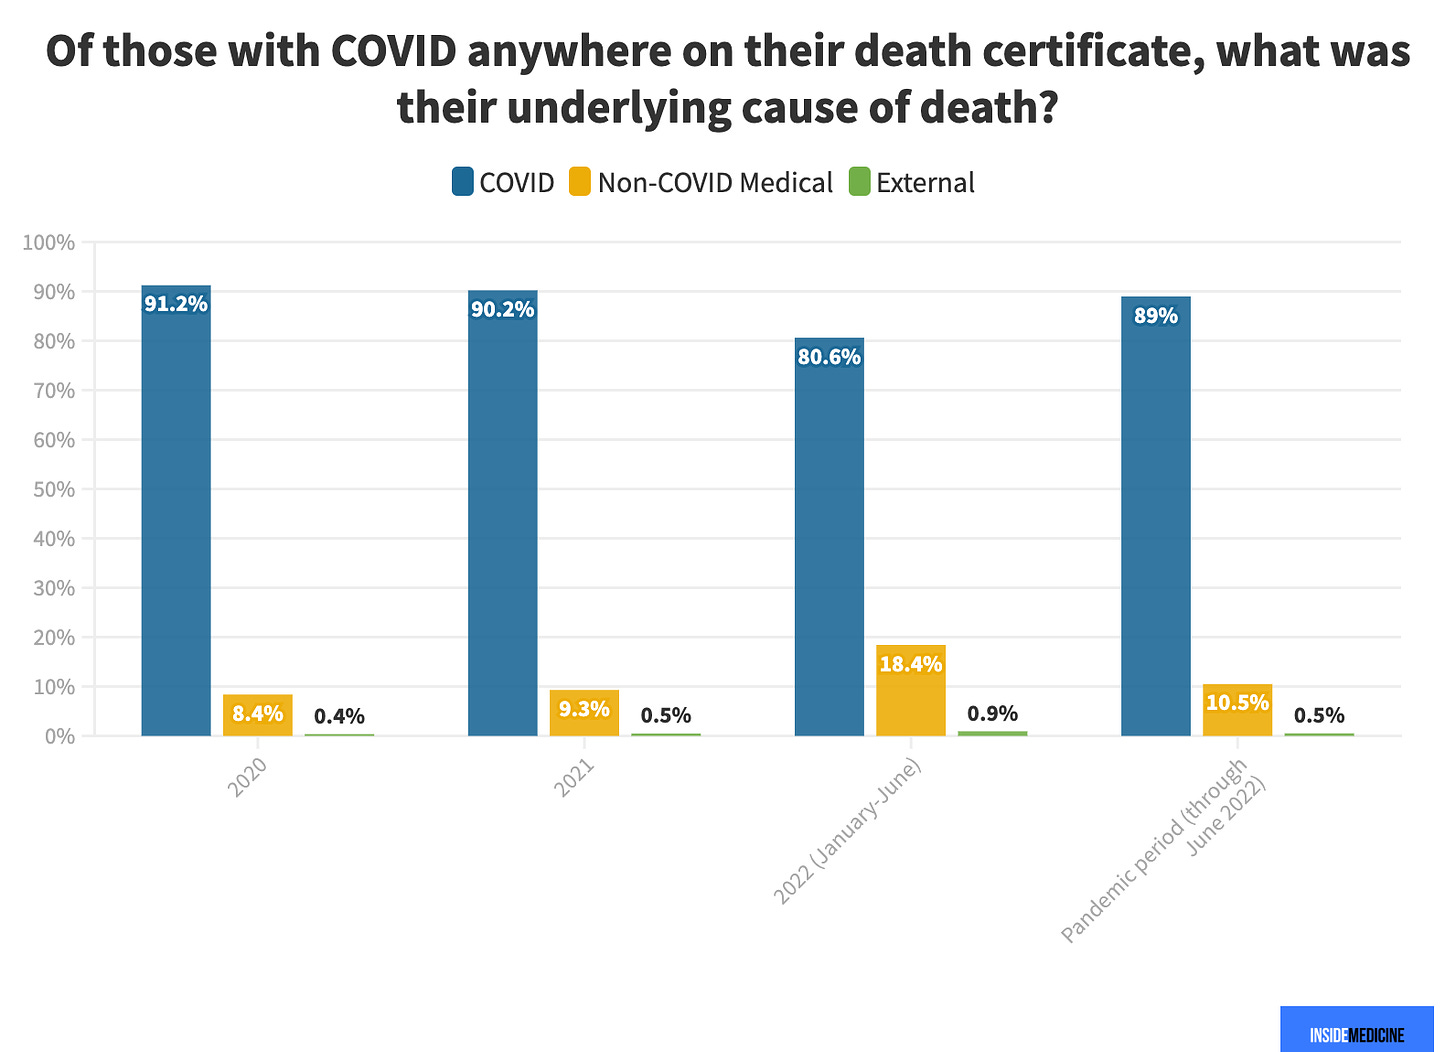 of those with covid anywhere on their death certificate, what was the underlying cause of death? mostly covid. then some medical...and then a tiny fraction unnatural (external)